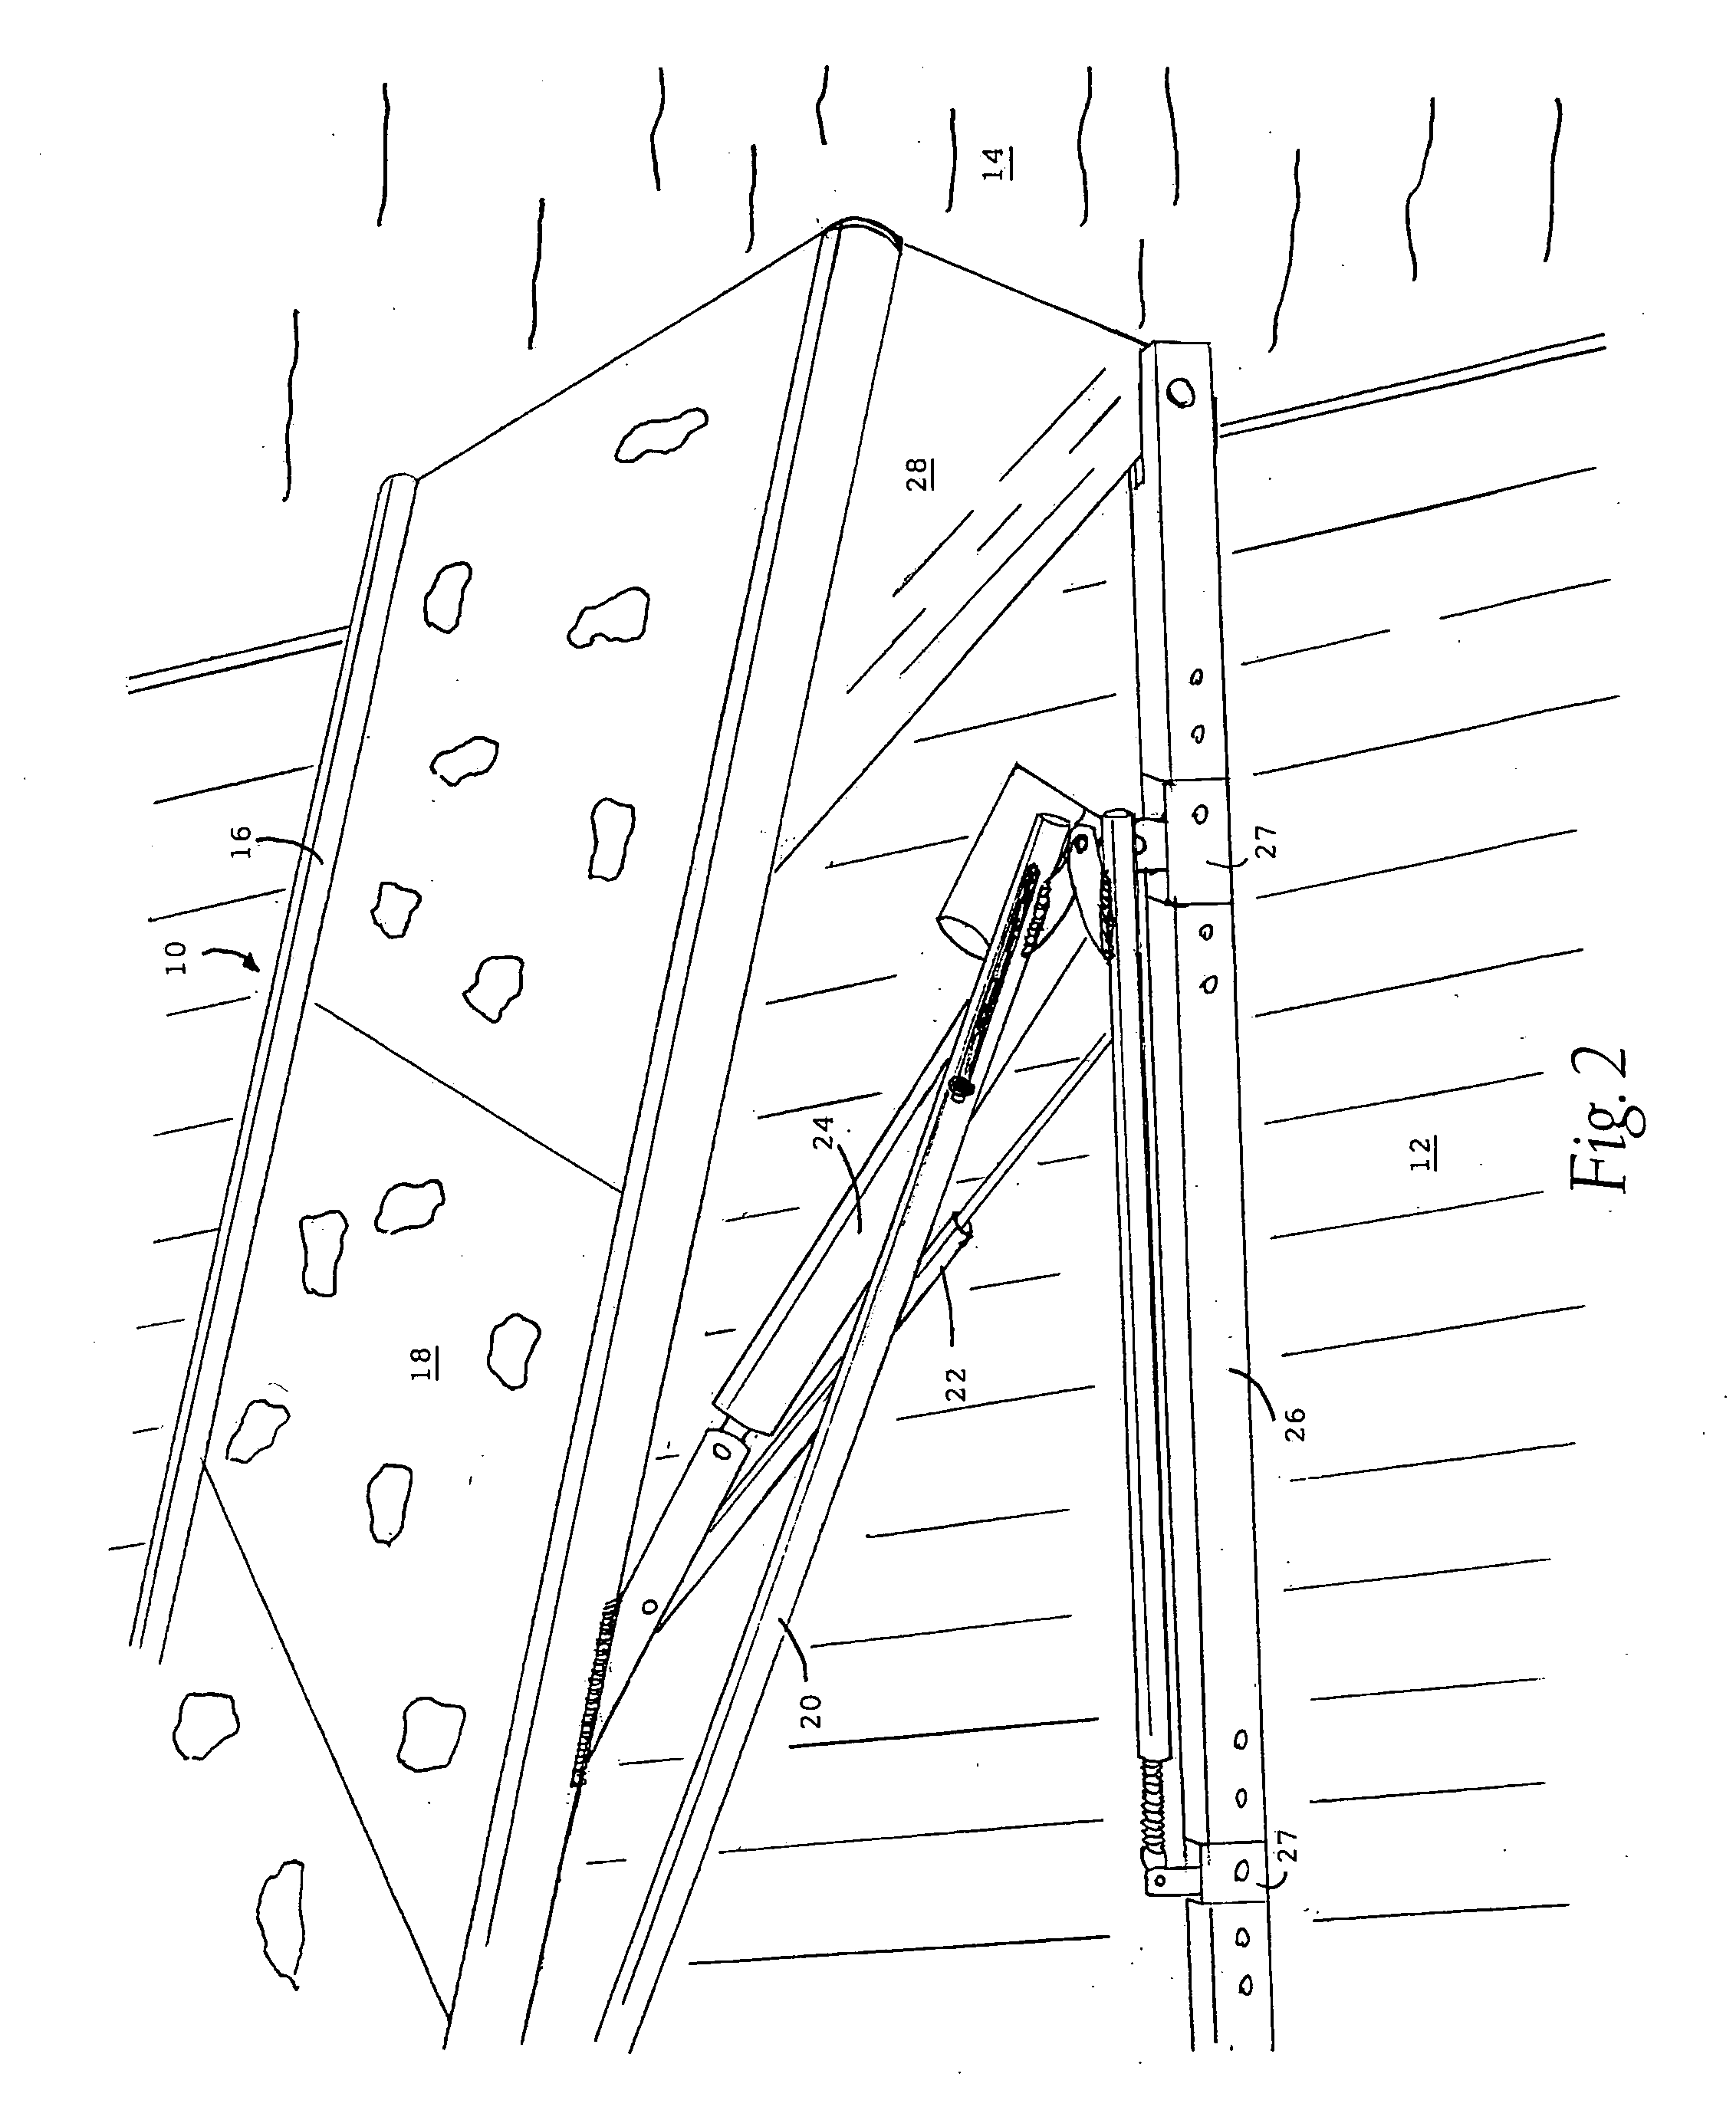 Artificial rock climbing systems and methods adapted for water environment